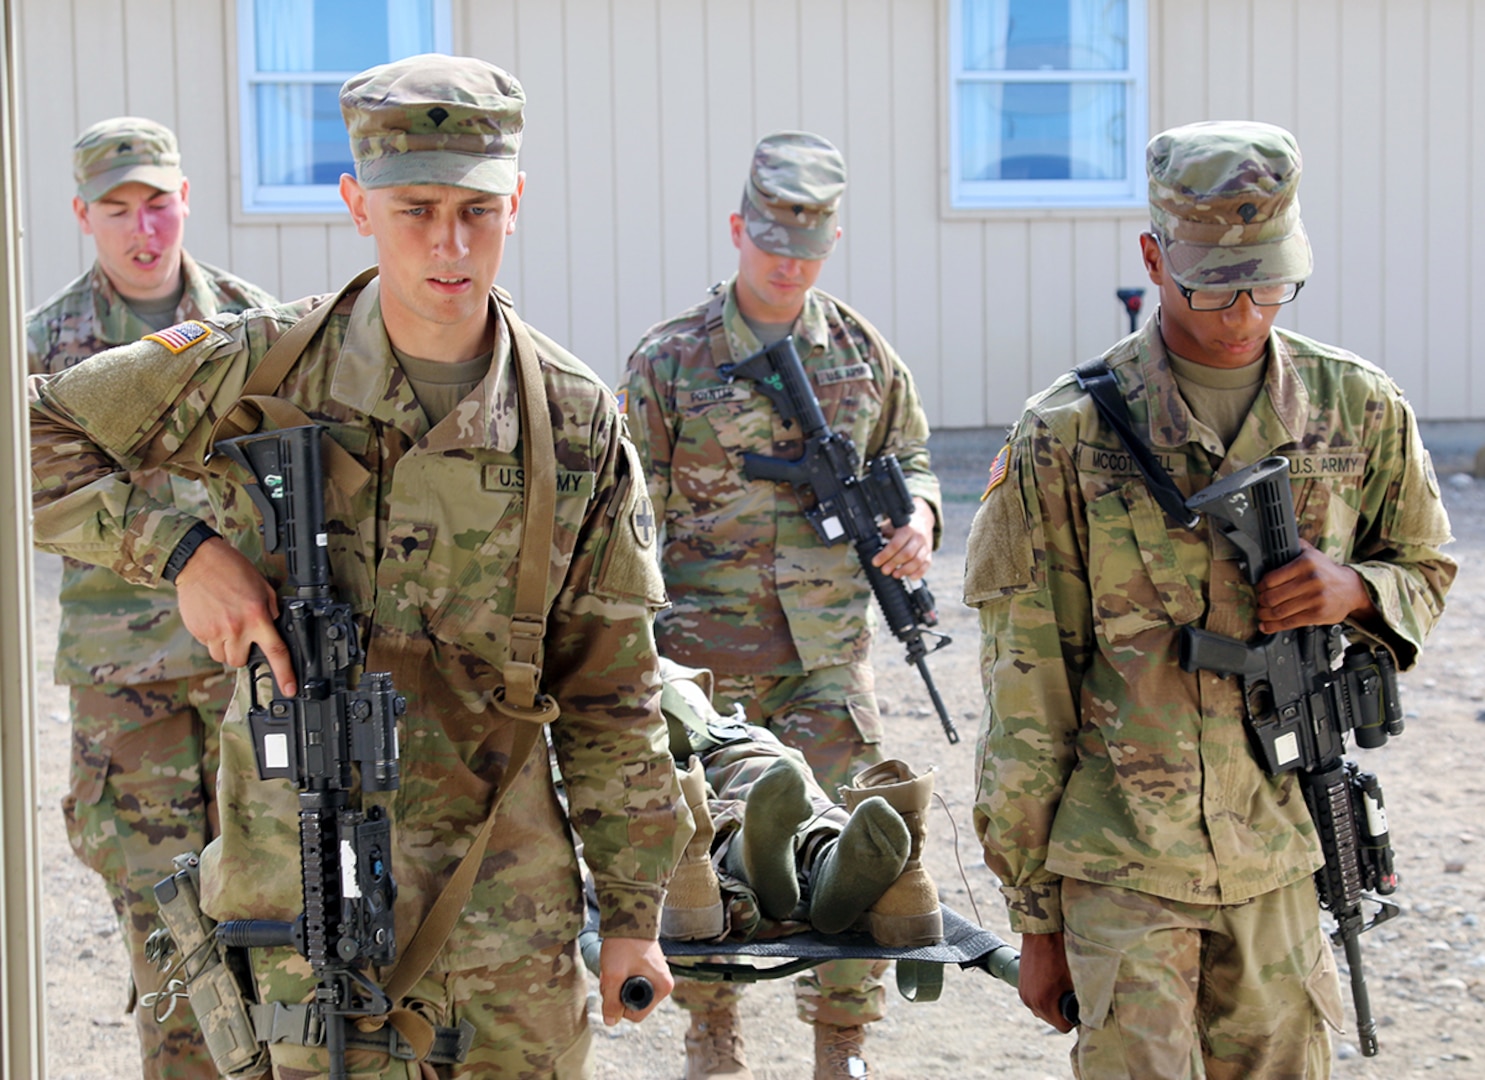 Soldiers of the 2nd Battalion, 130th Infantry Regiment, Illinois Army National Guard, participate in Combat Life Saver drills during Rising Thunder 19, Sept. 3, 2019 at the Yakima Training Center in Yakima, Washington.